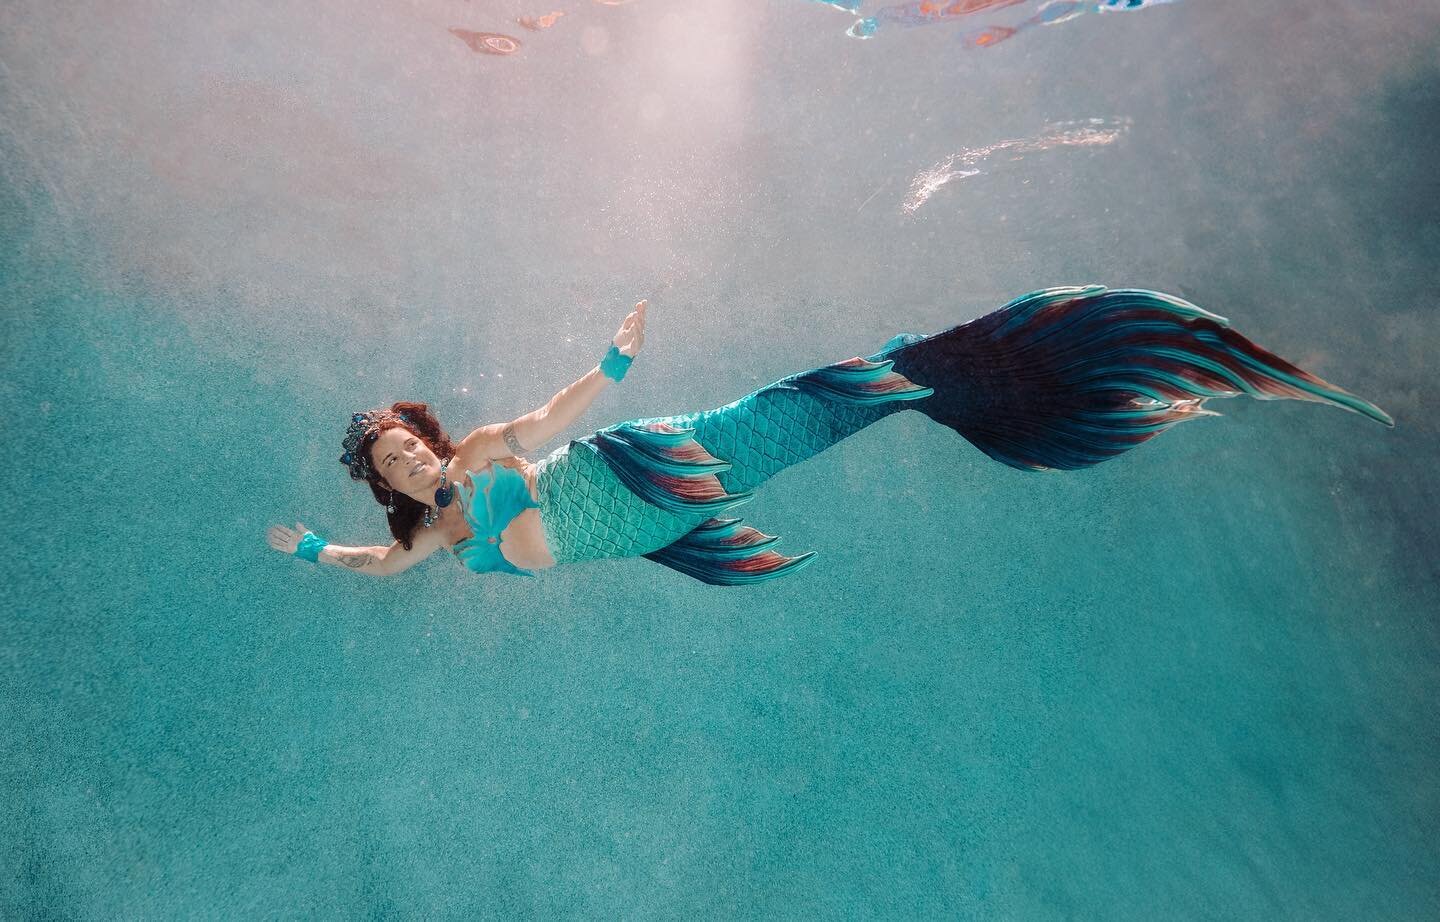 The secret of life is to surrender &amp; go with the flow, which is such a perfect embodiment of being in the water. Don&rsquo;t you agree? 🔱

🧜&zwj;♀️ @finfolkproductions @bayoumermaidart @mermaid.regaliayyc 
📸 @underwater_erenashimoda 

#mermaid